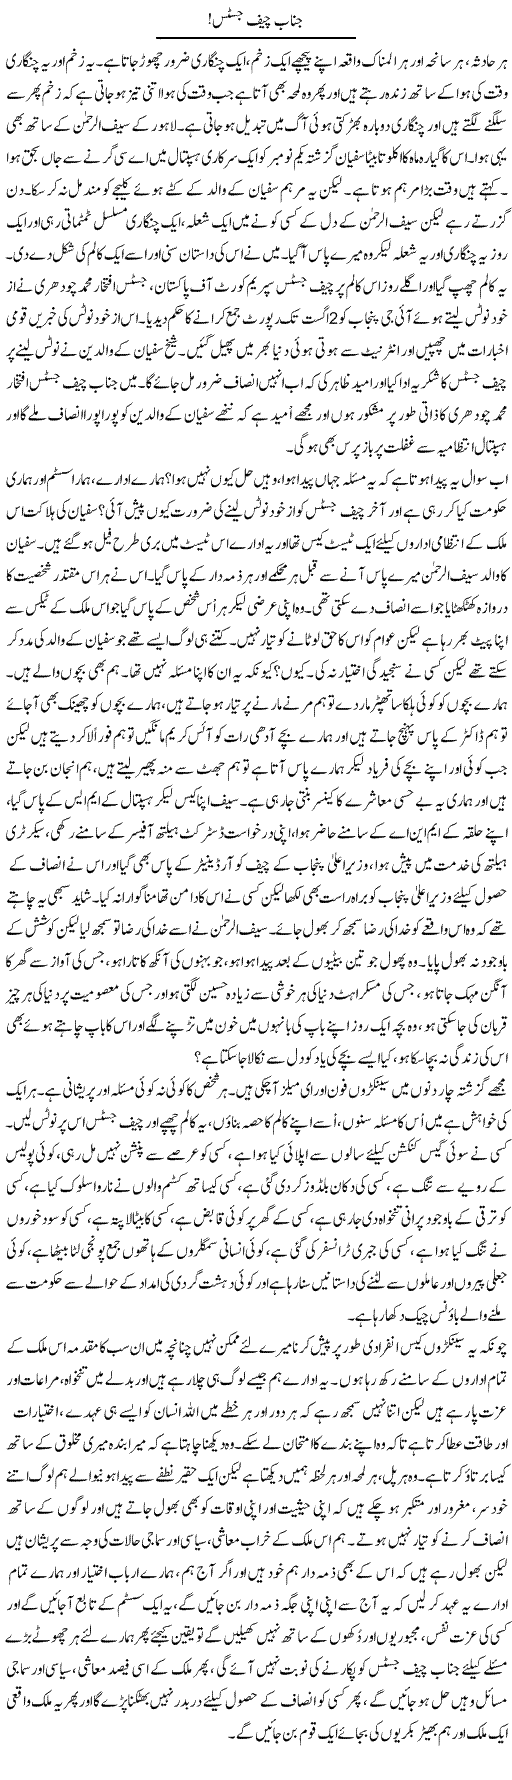 Janab Chief Justice Express Column Amad Chaudhry 27 July 2010